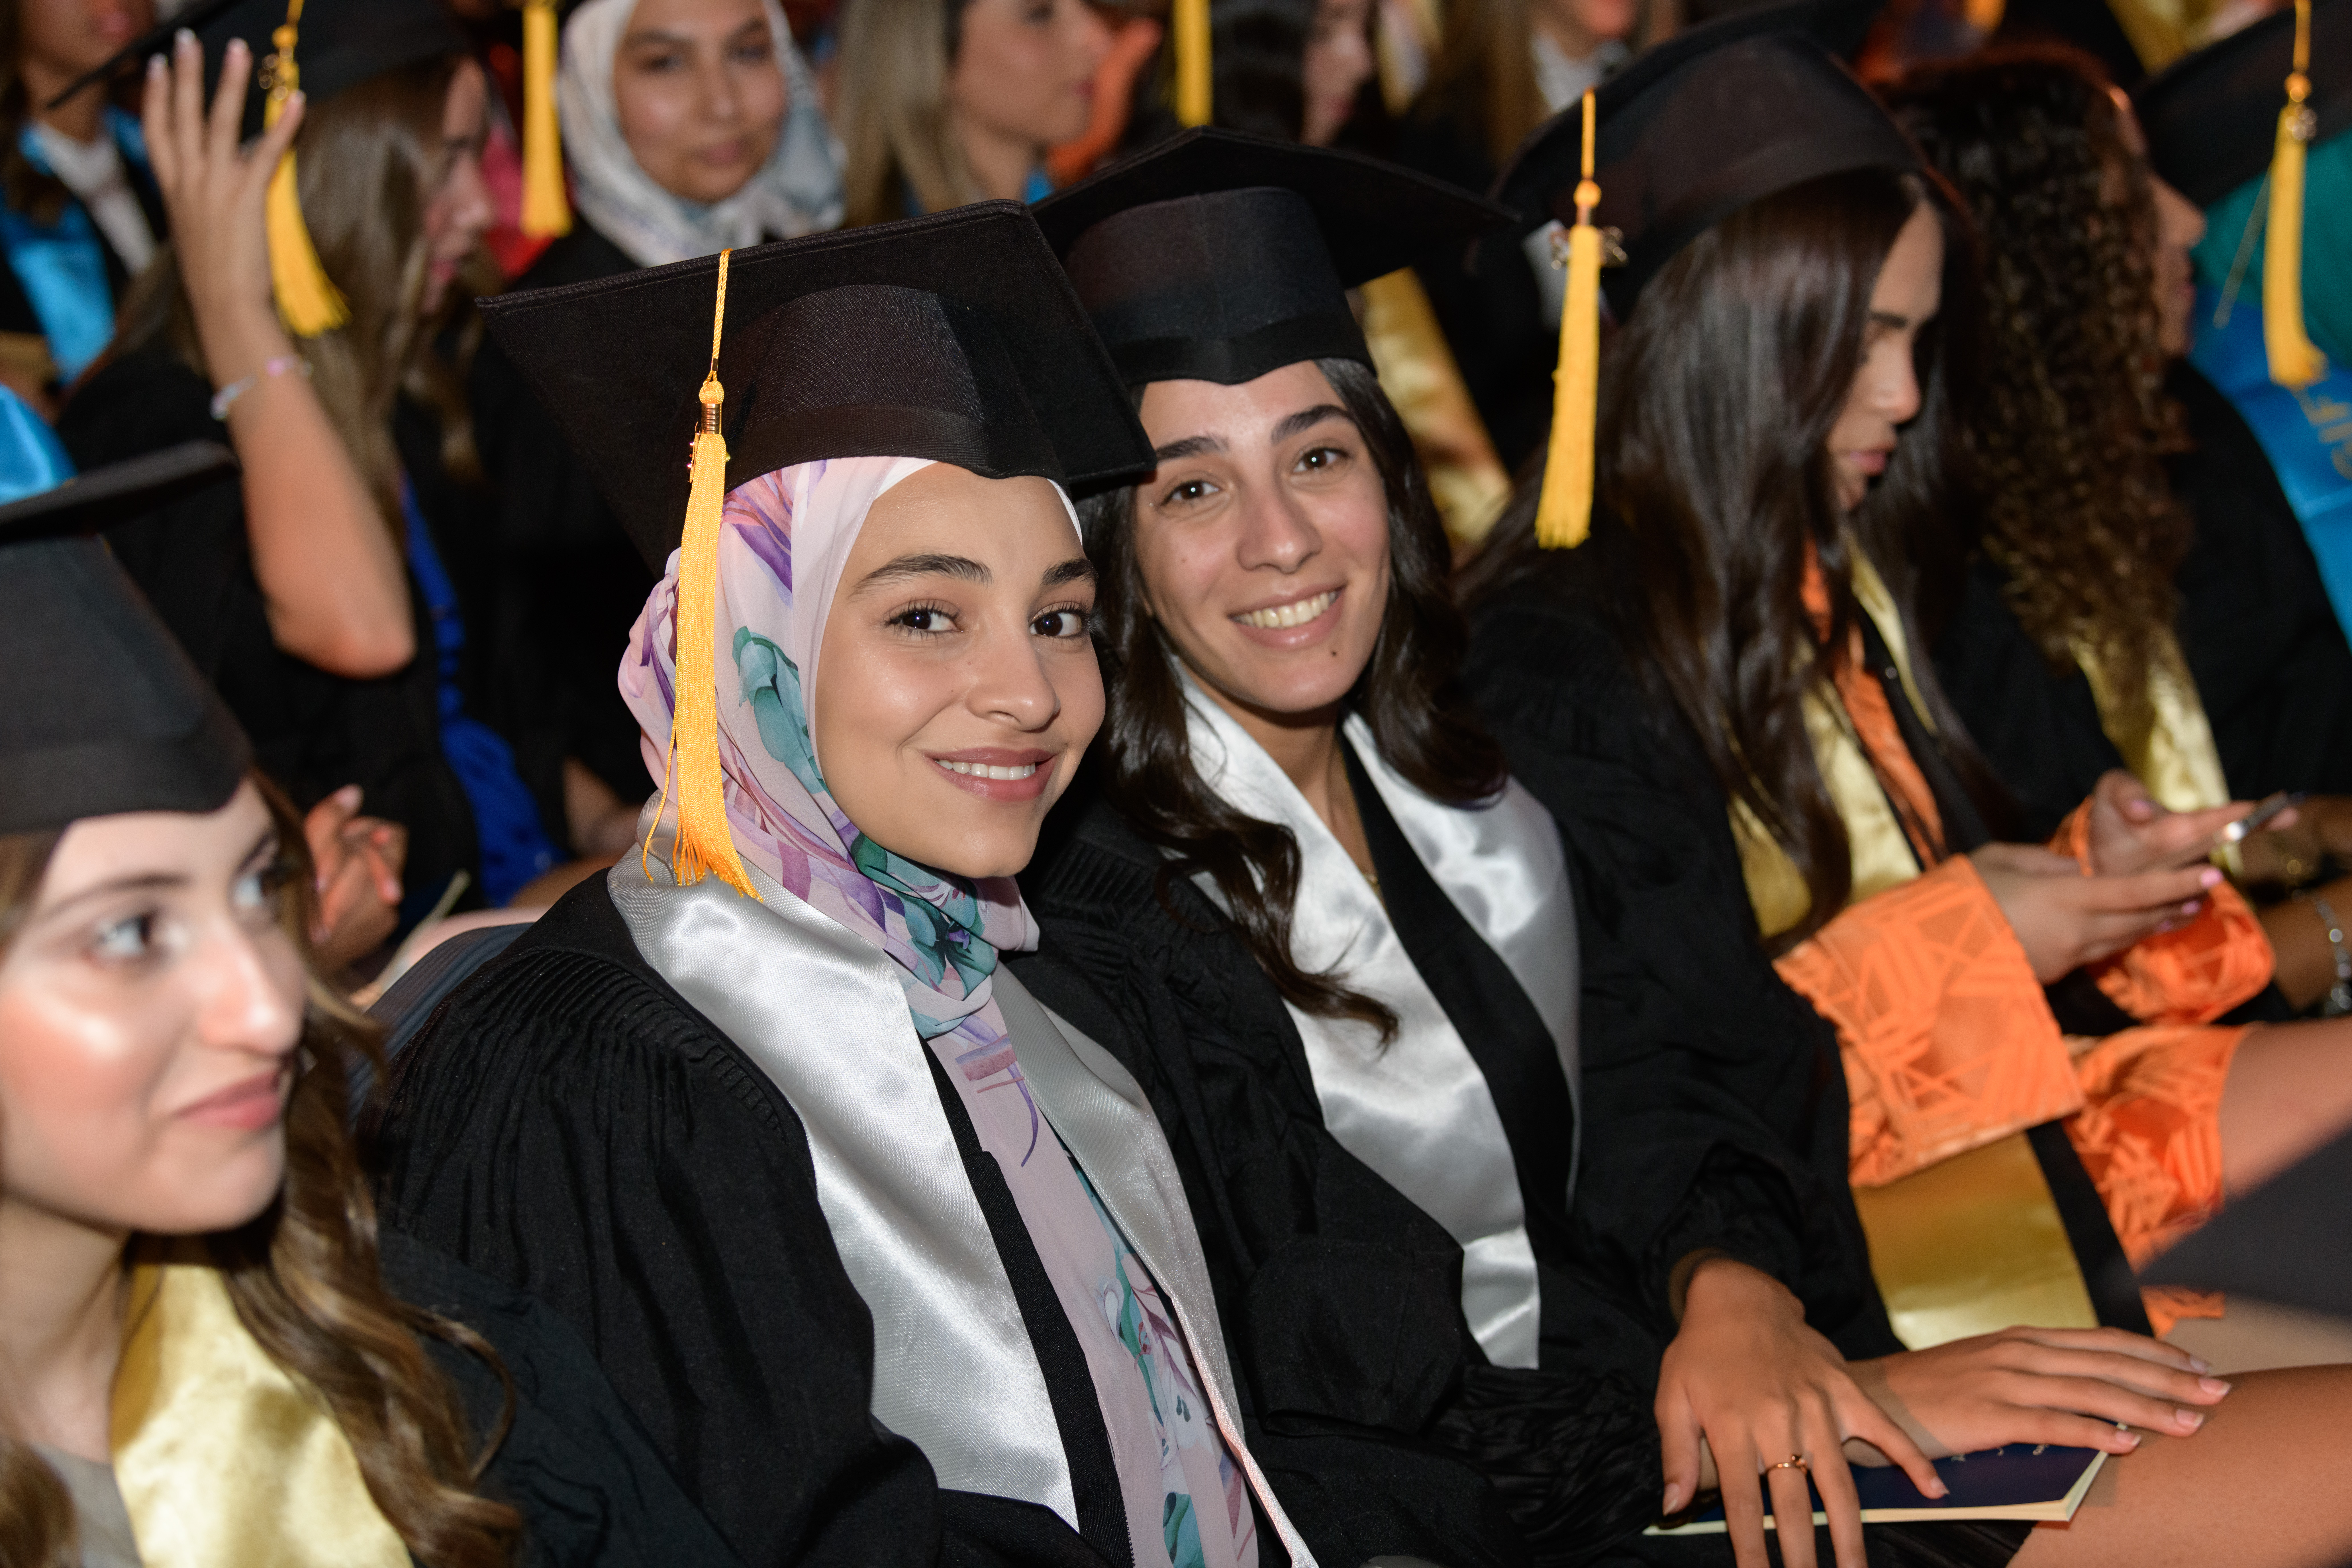 Students in caps and gowns smile in a crowded room